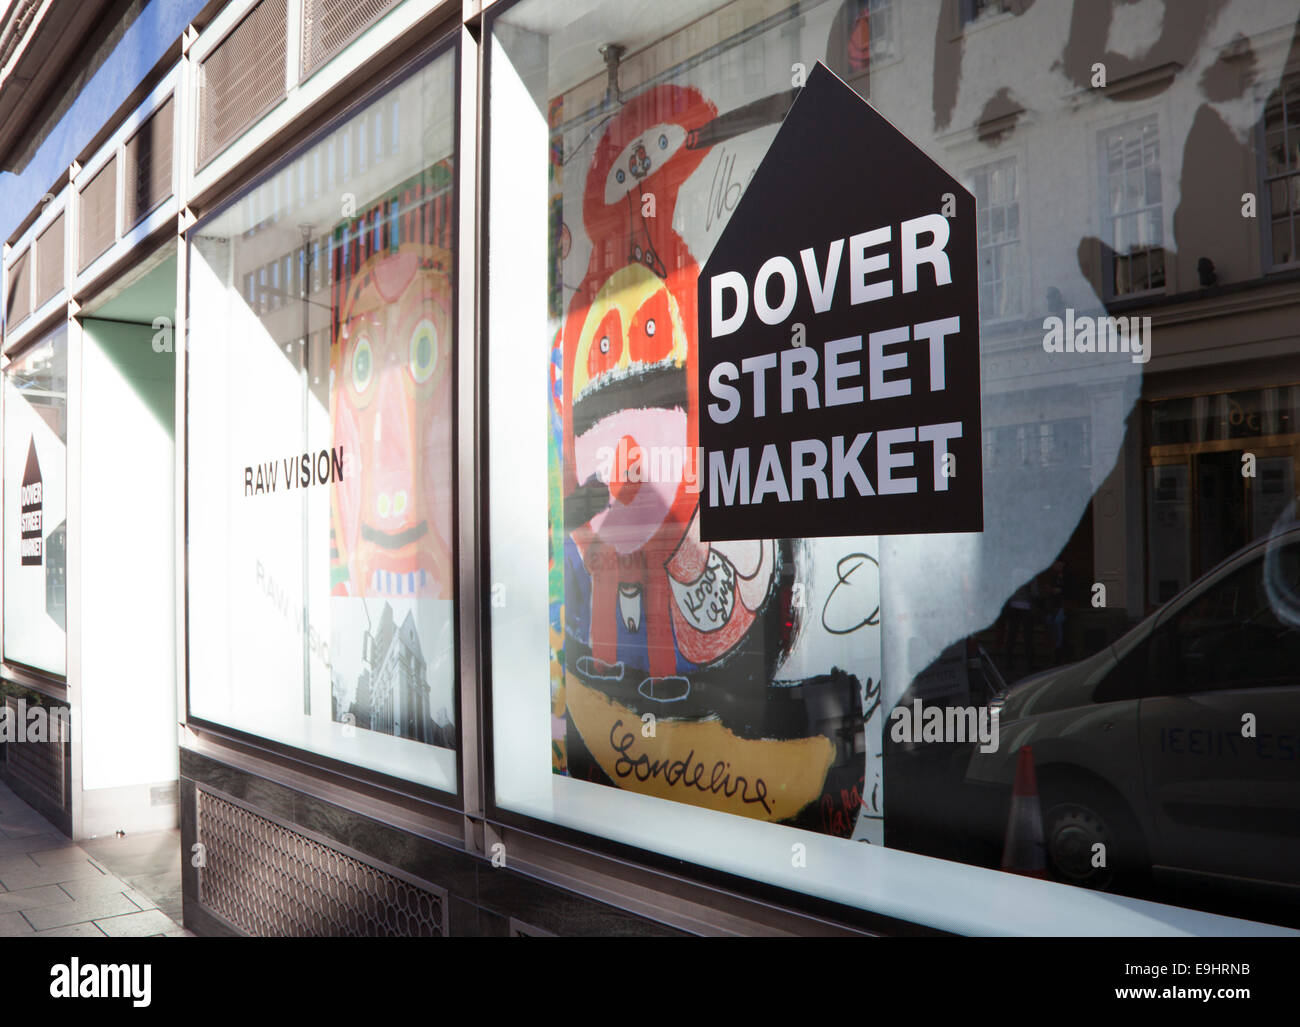 Dover Street Market High Resolution Stock Photography and Images - Alamy